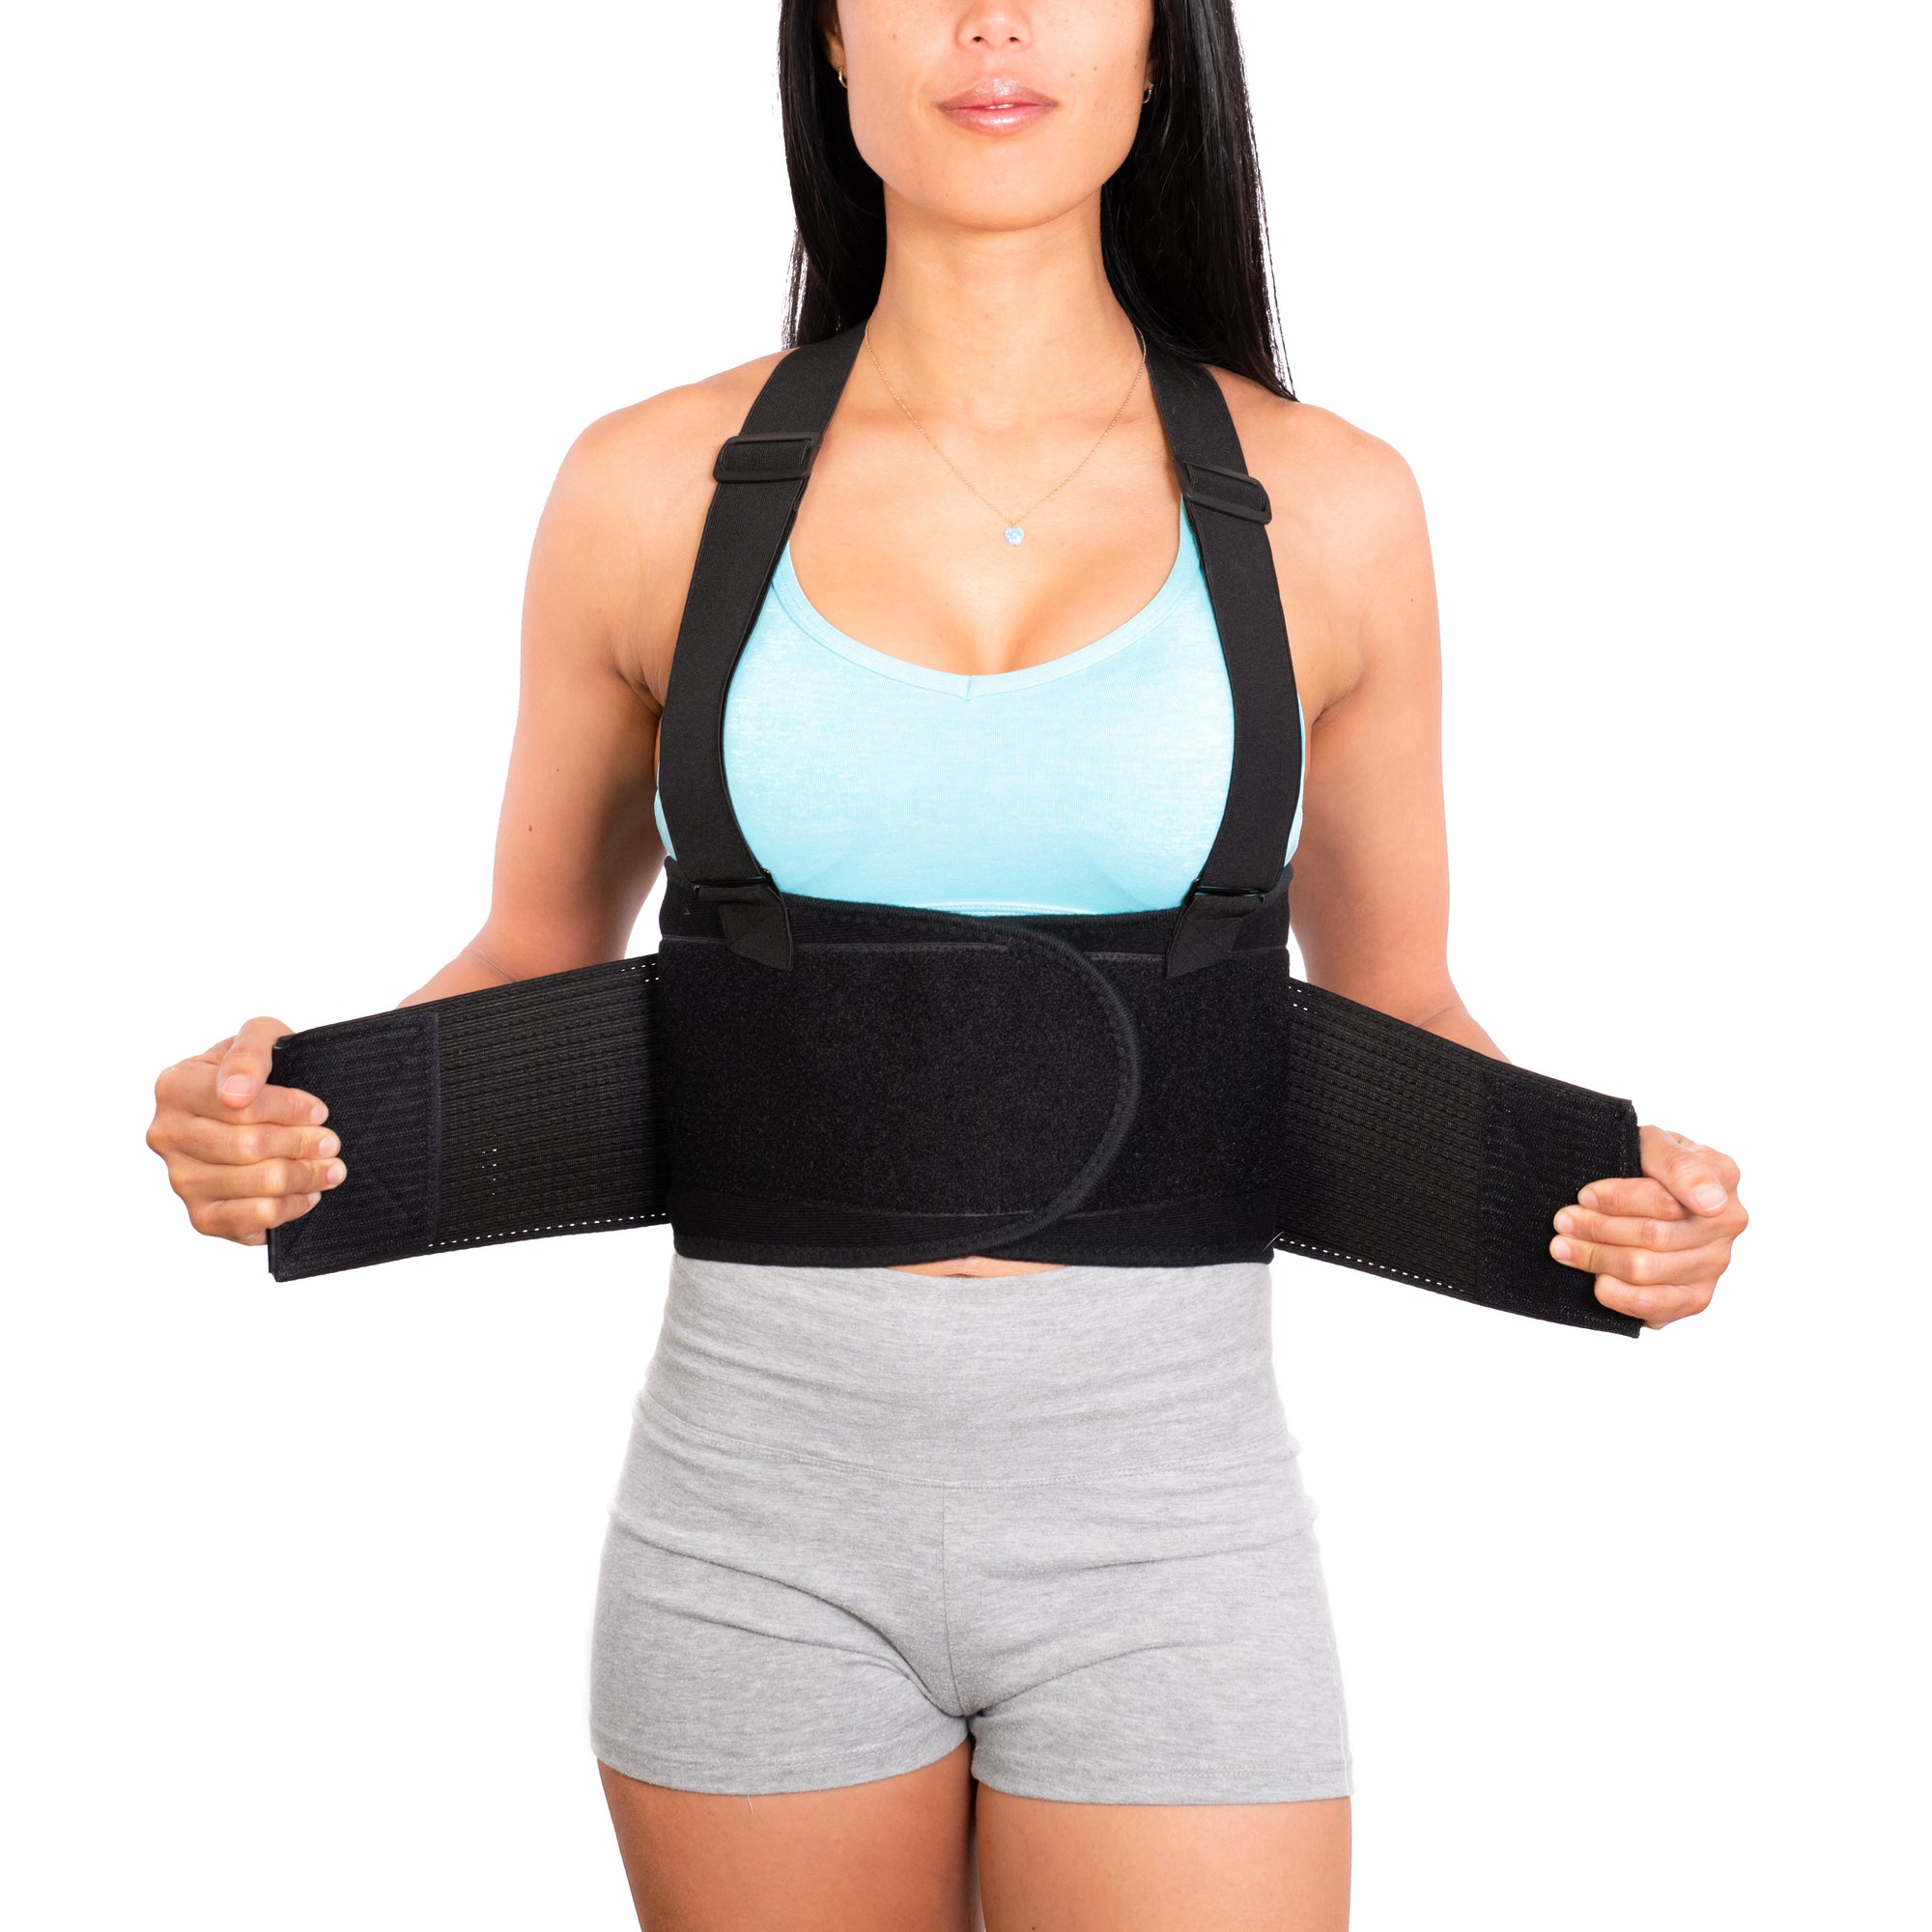 Lower Back Brace with Suspenders in PLUS SIZE - NeoHealth